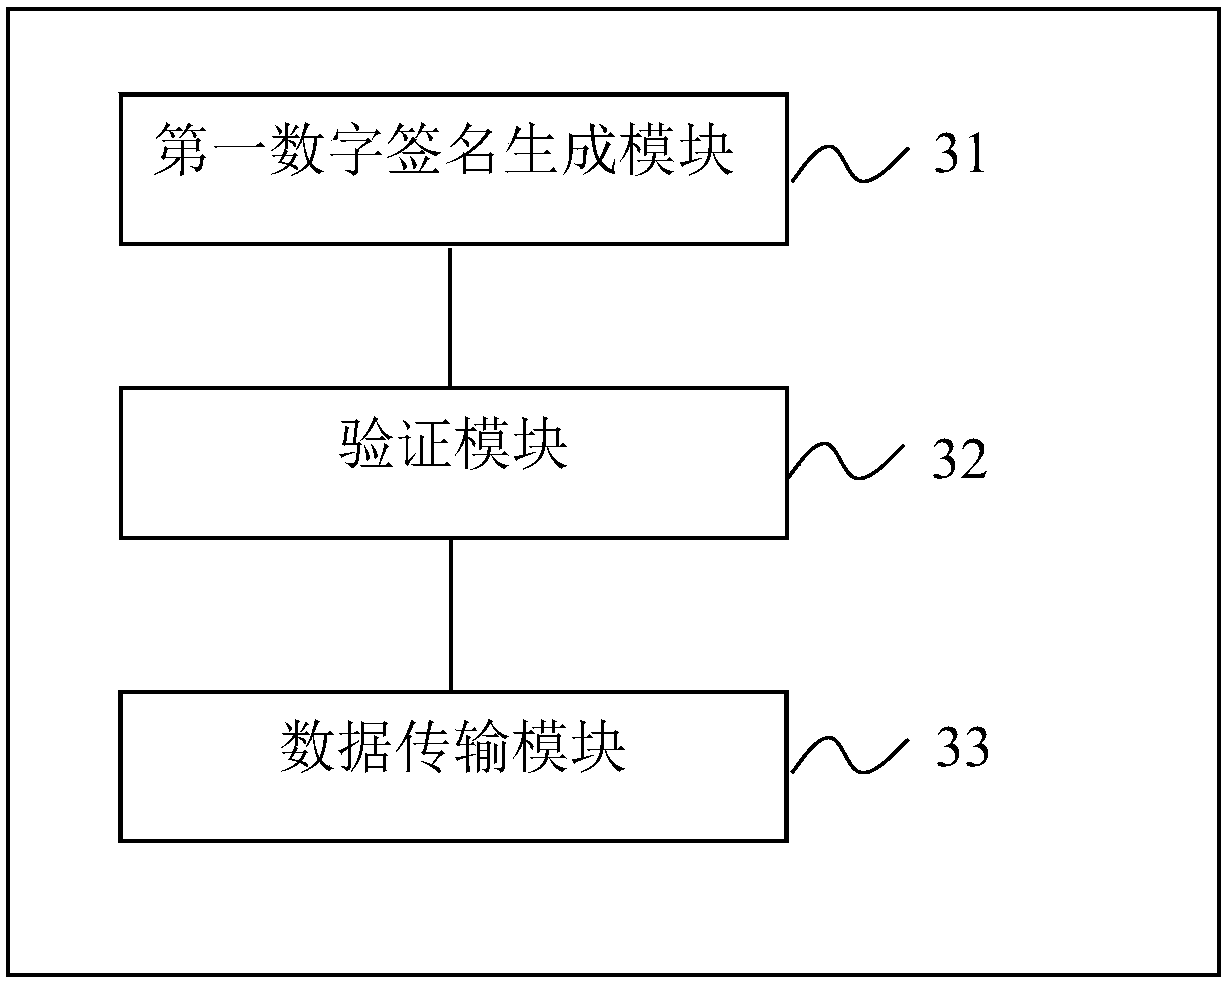 Two-way authentication method and system